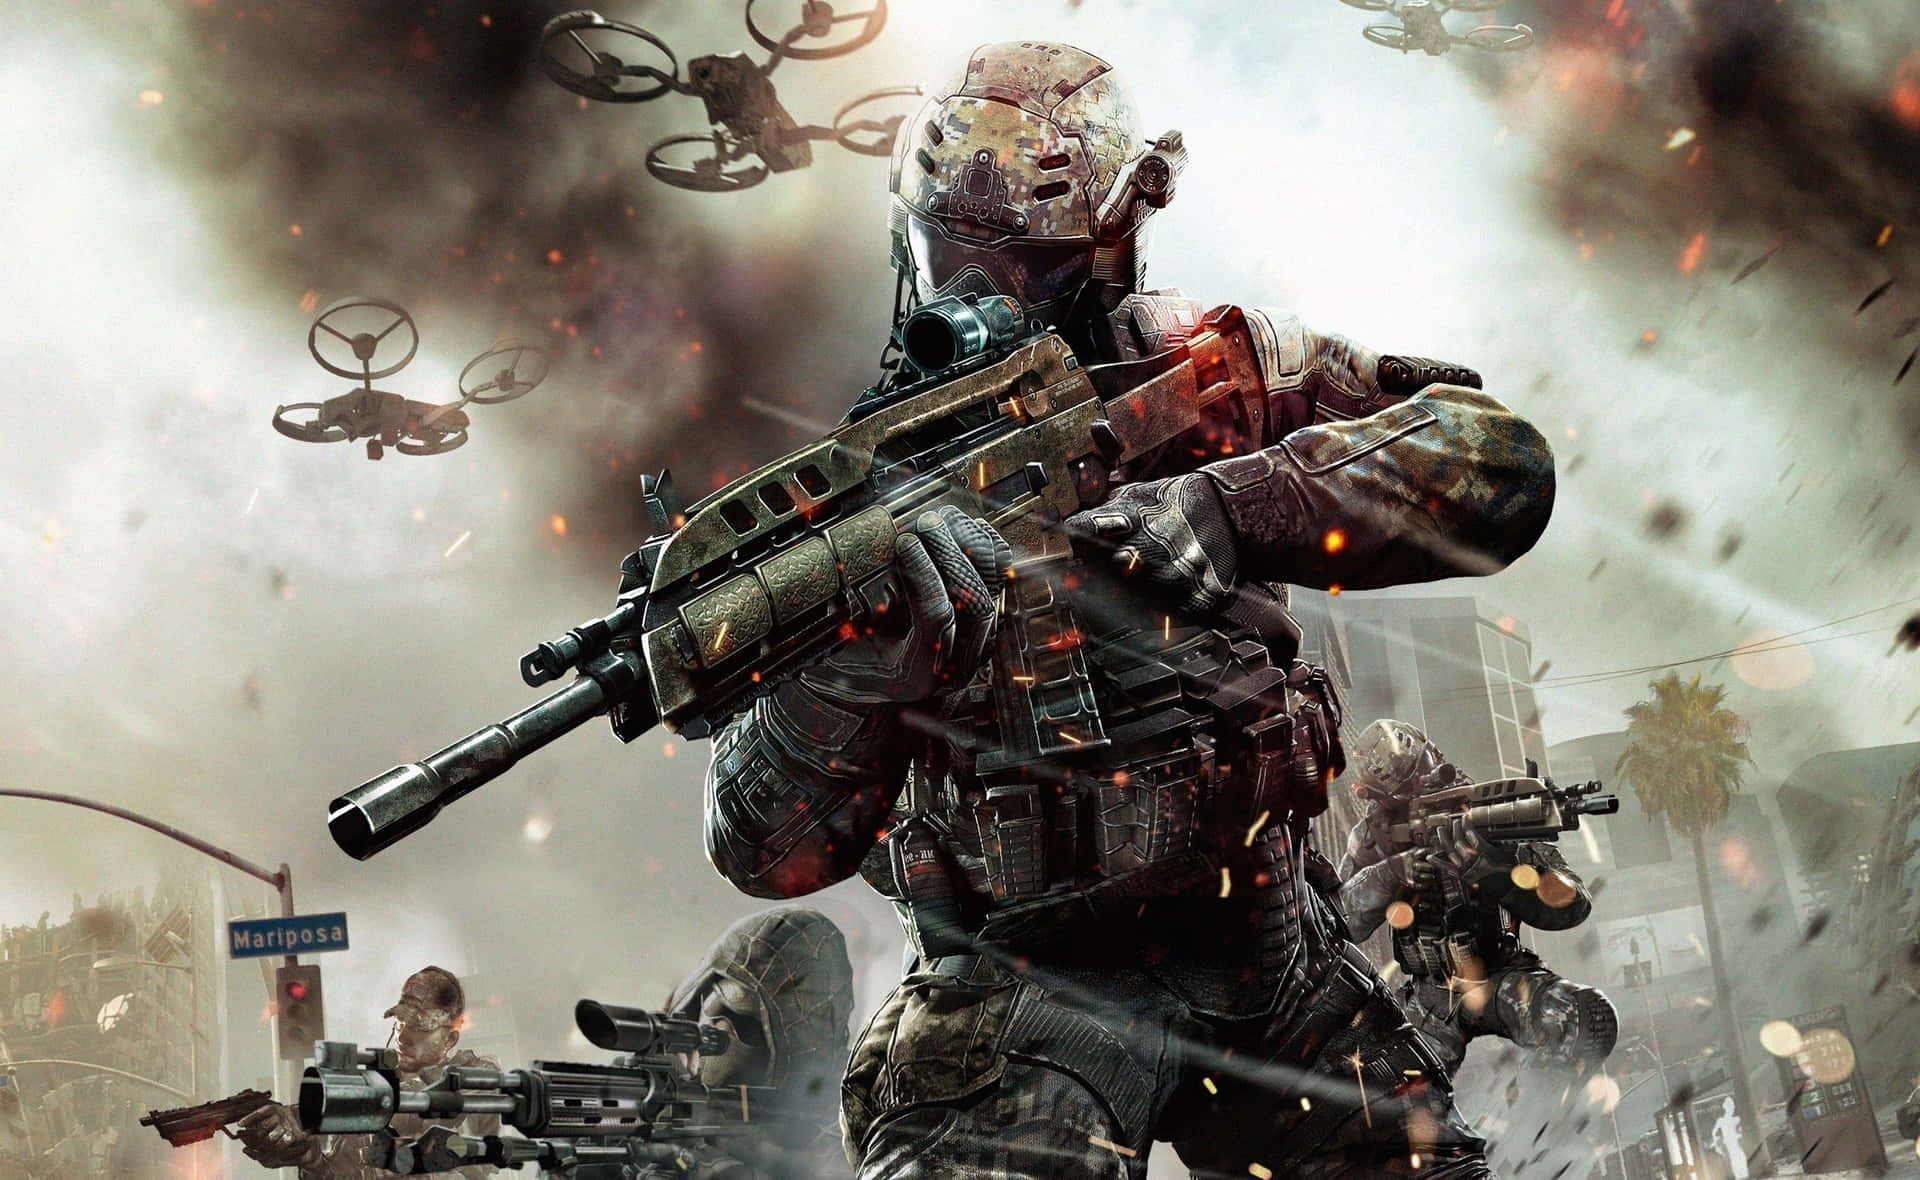 Free Call Of Duty 2020 Wallpaper Downloads, [100+] Call Of Duty 2020  Wallpapers for FREE 